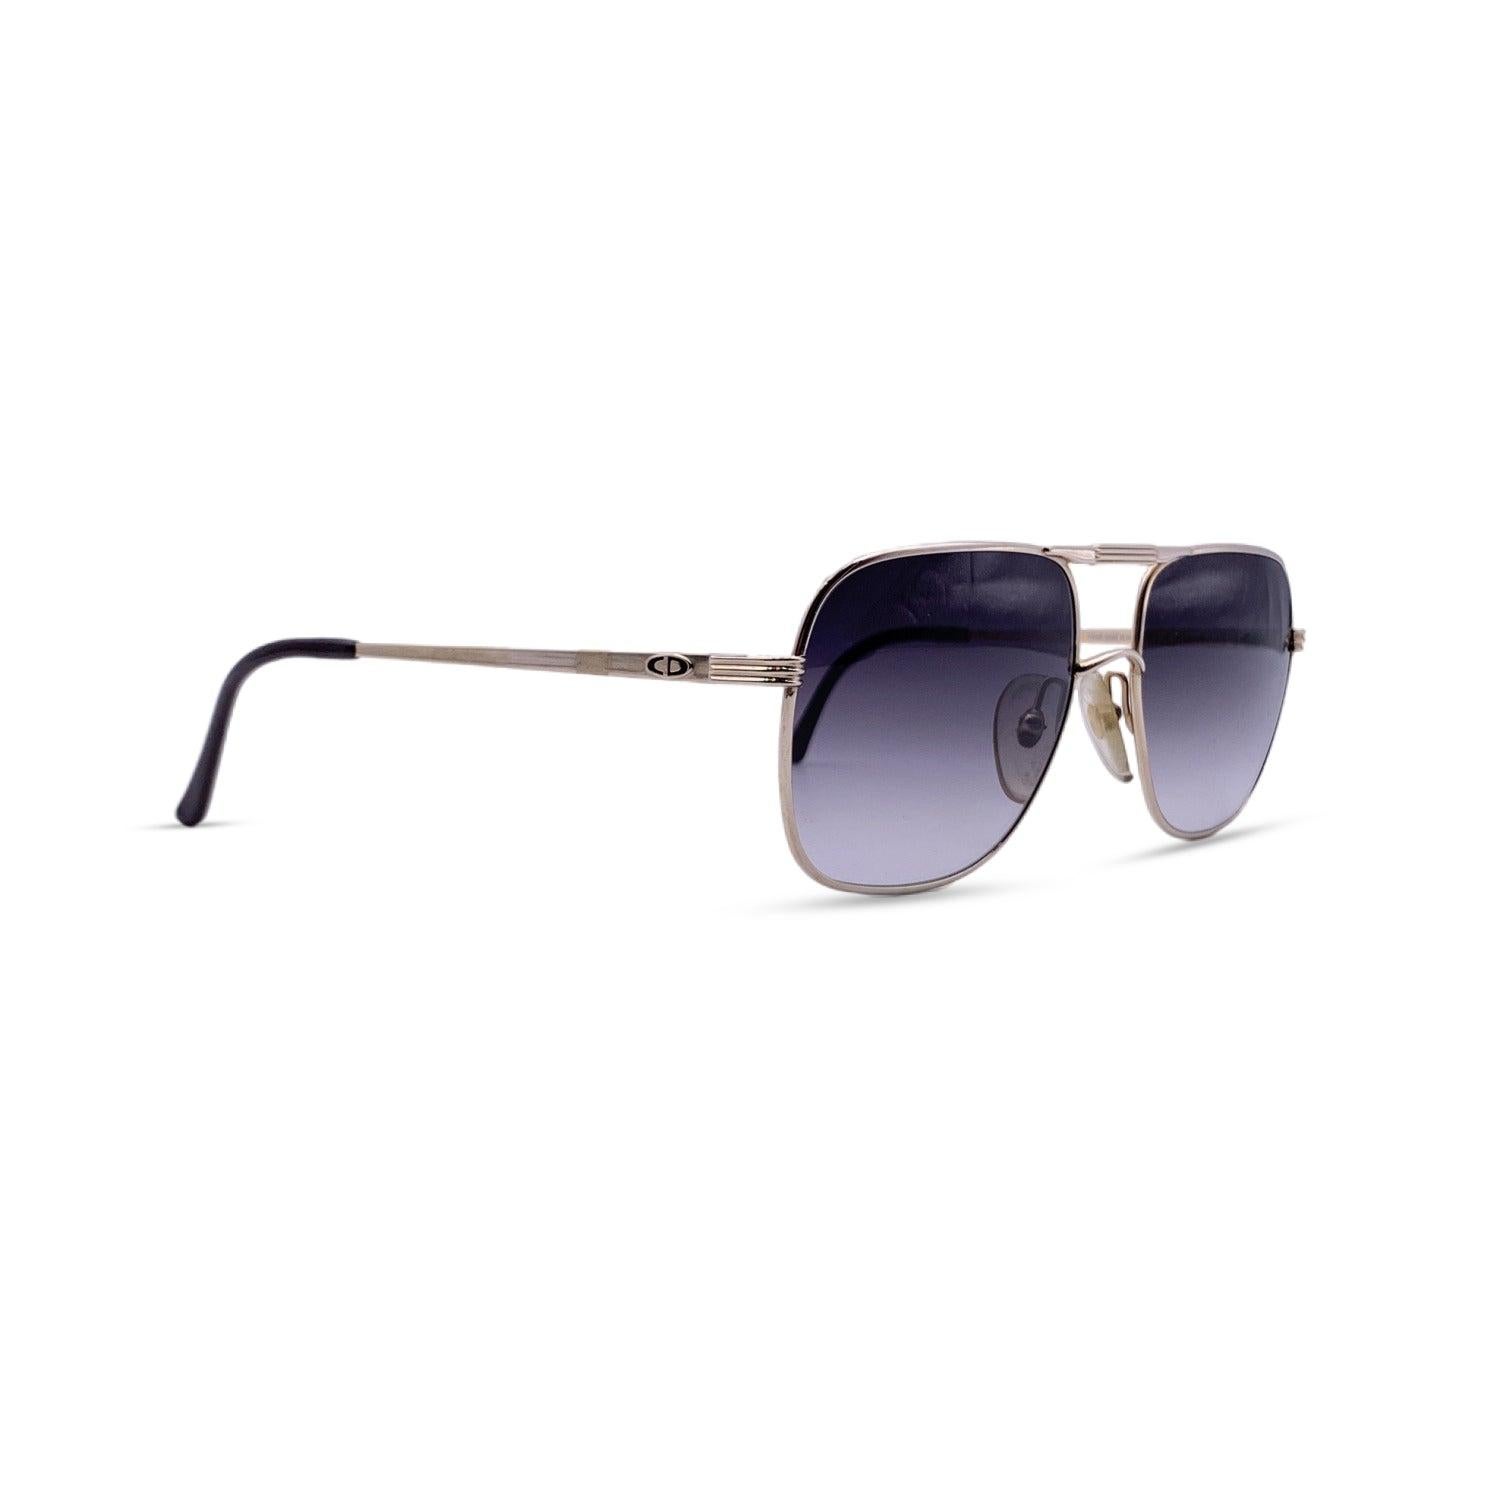 Christian Dior Monsieur Vintage Sunglasses 2443 40 57/18 130mm In Excellent Condition For Sale In Rome, Rome